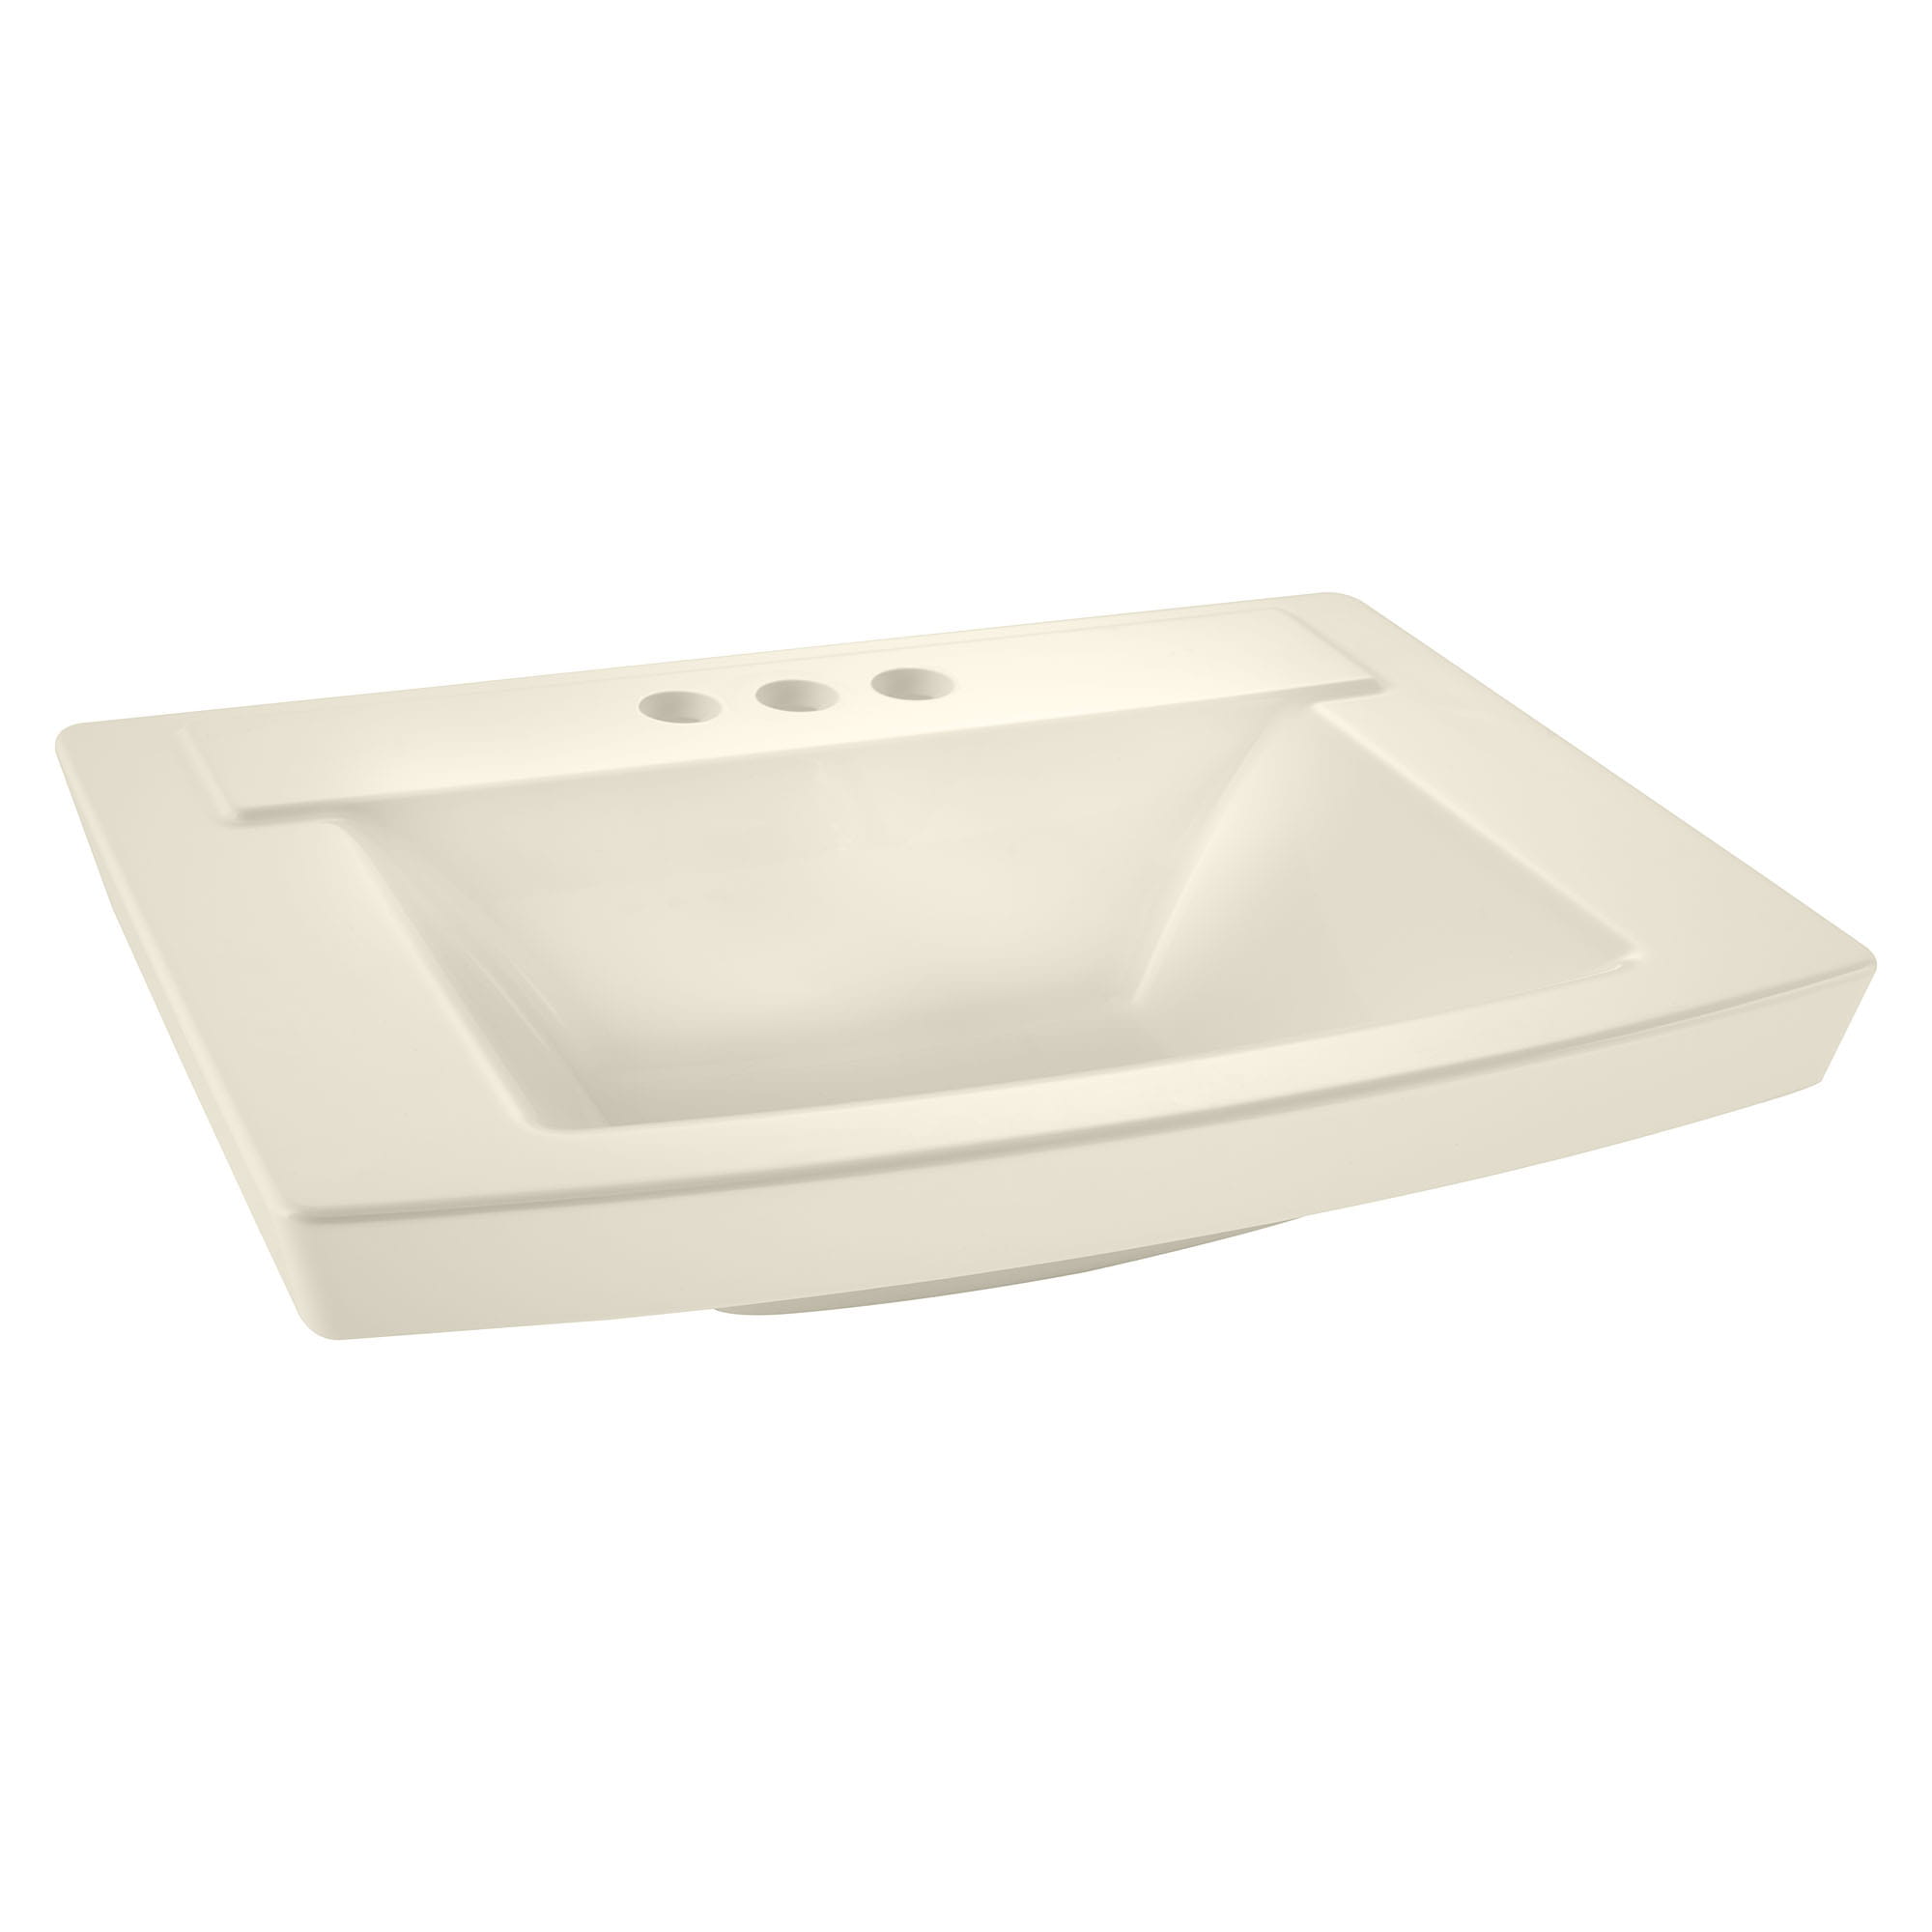 Townsend 24 x 18 Inch Above Counter Sink With 4 Inch Centerset LINEN